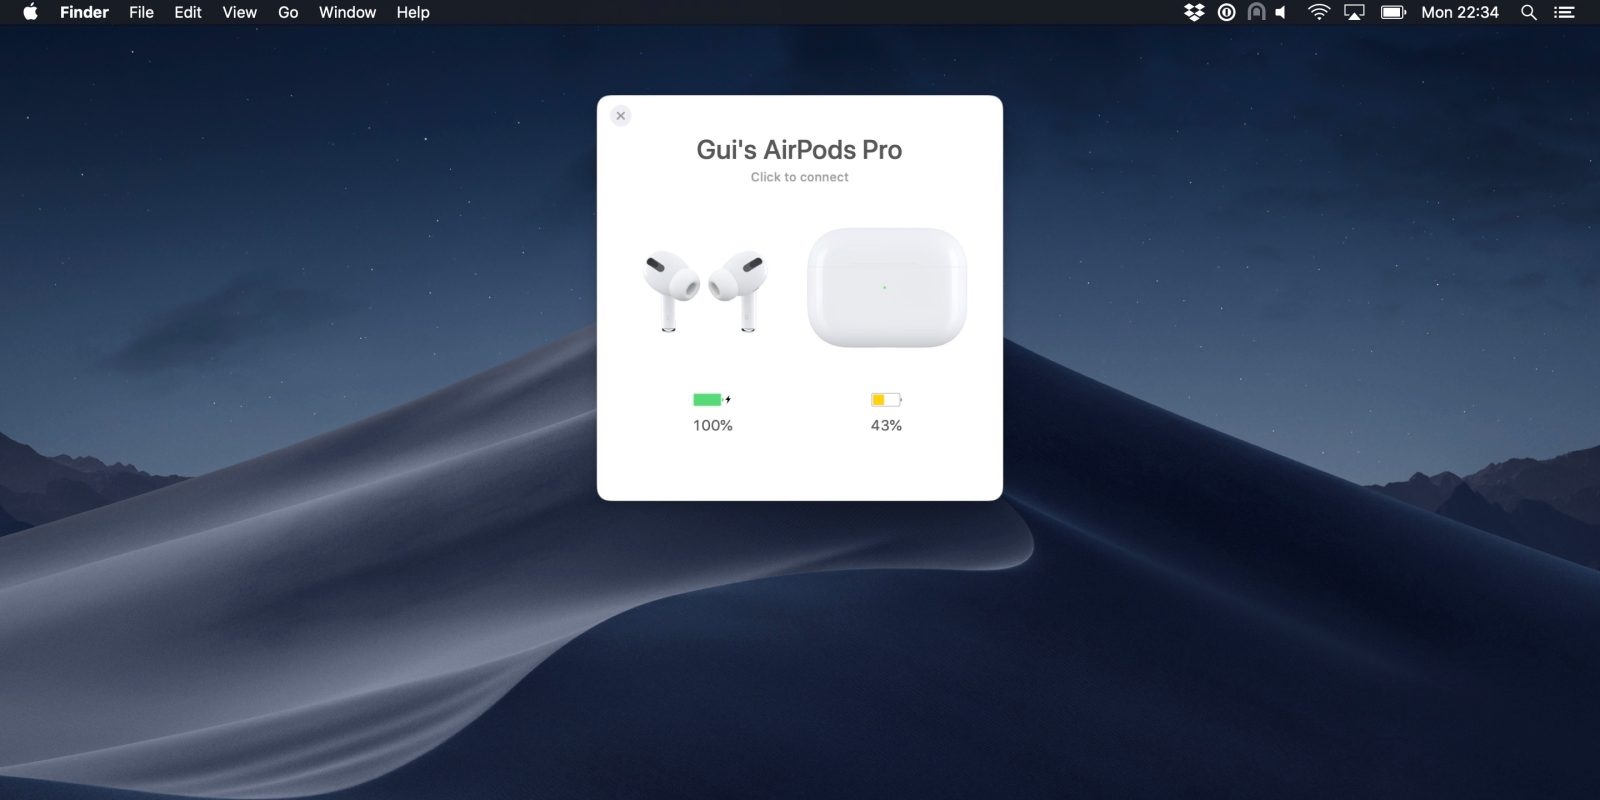 Tips and tricks for getting the most out of your new AirPods or AirPods Pro